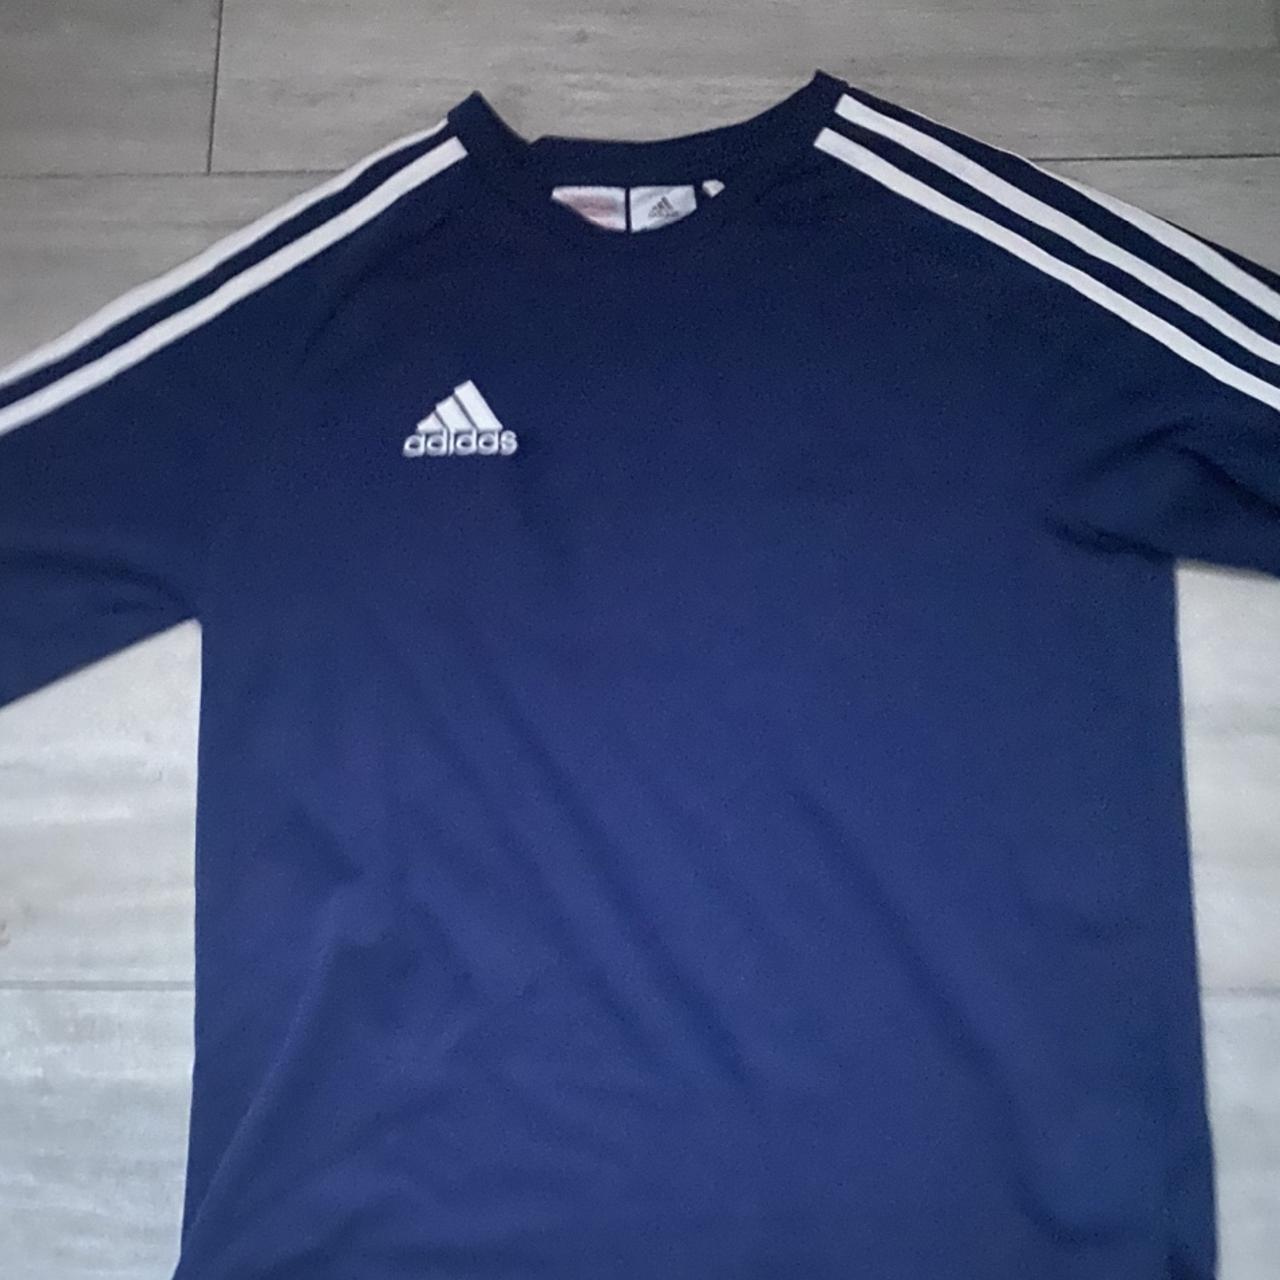 real adidas blue top sports top navy/ blue perfect... - Depop